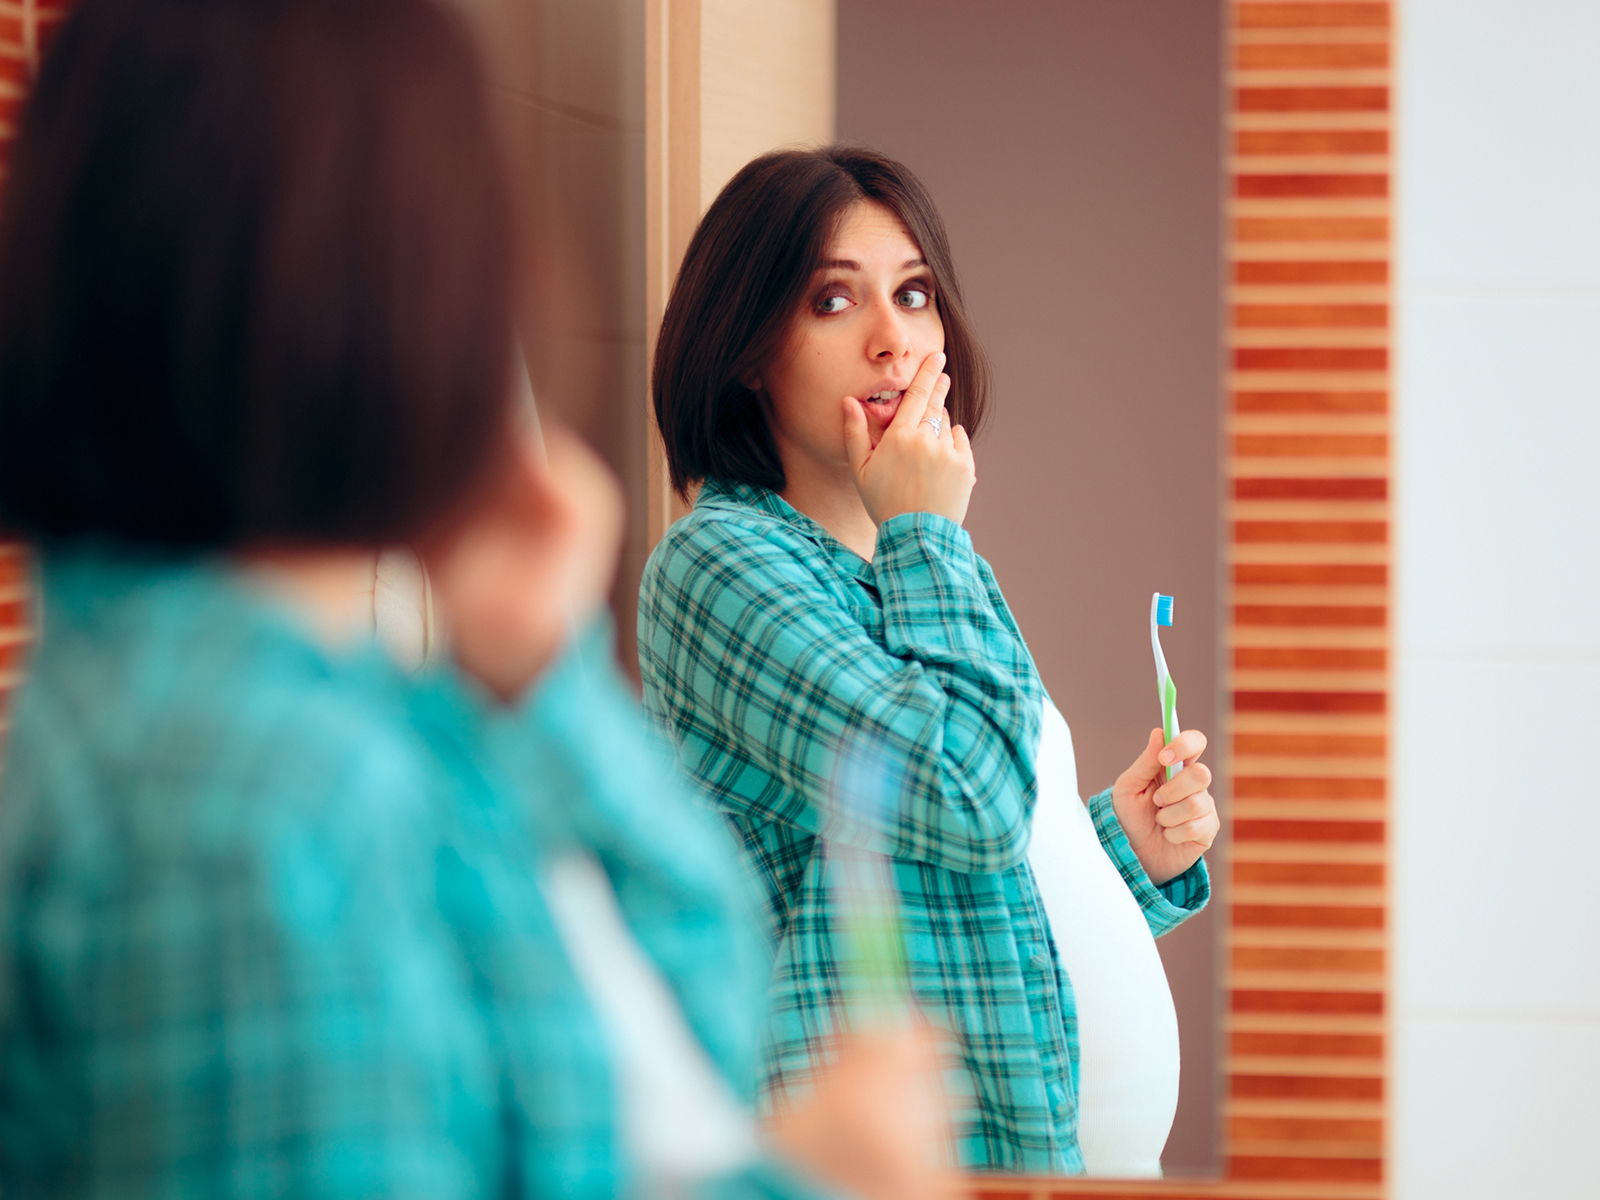 Why Dental care is Even More Important When You’re pregnant?